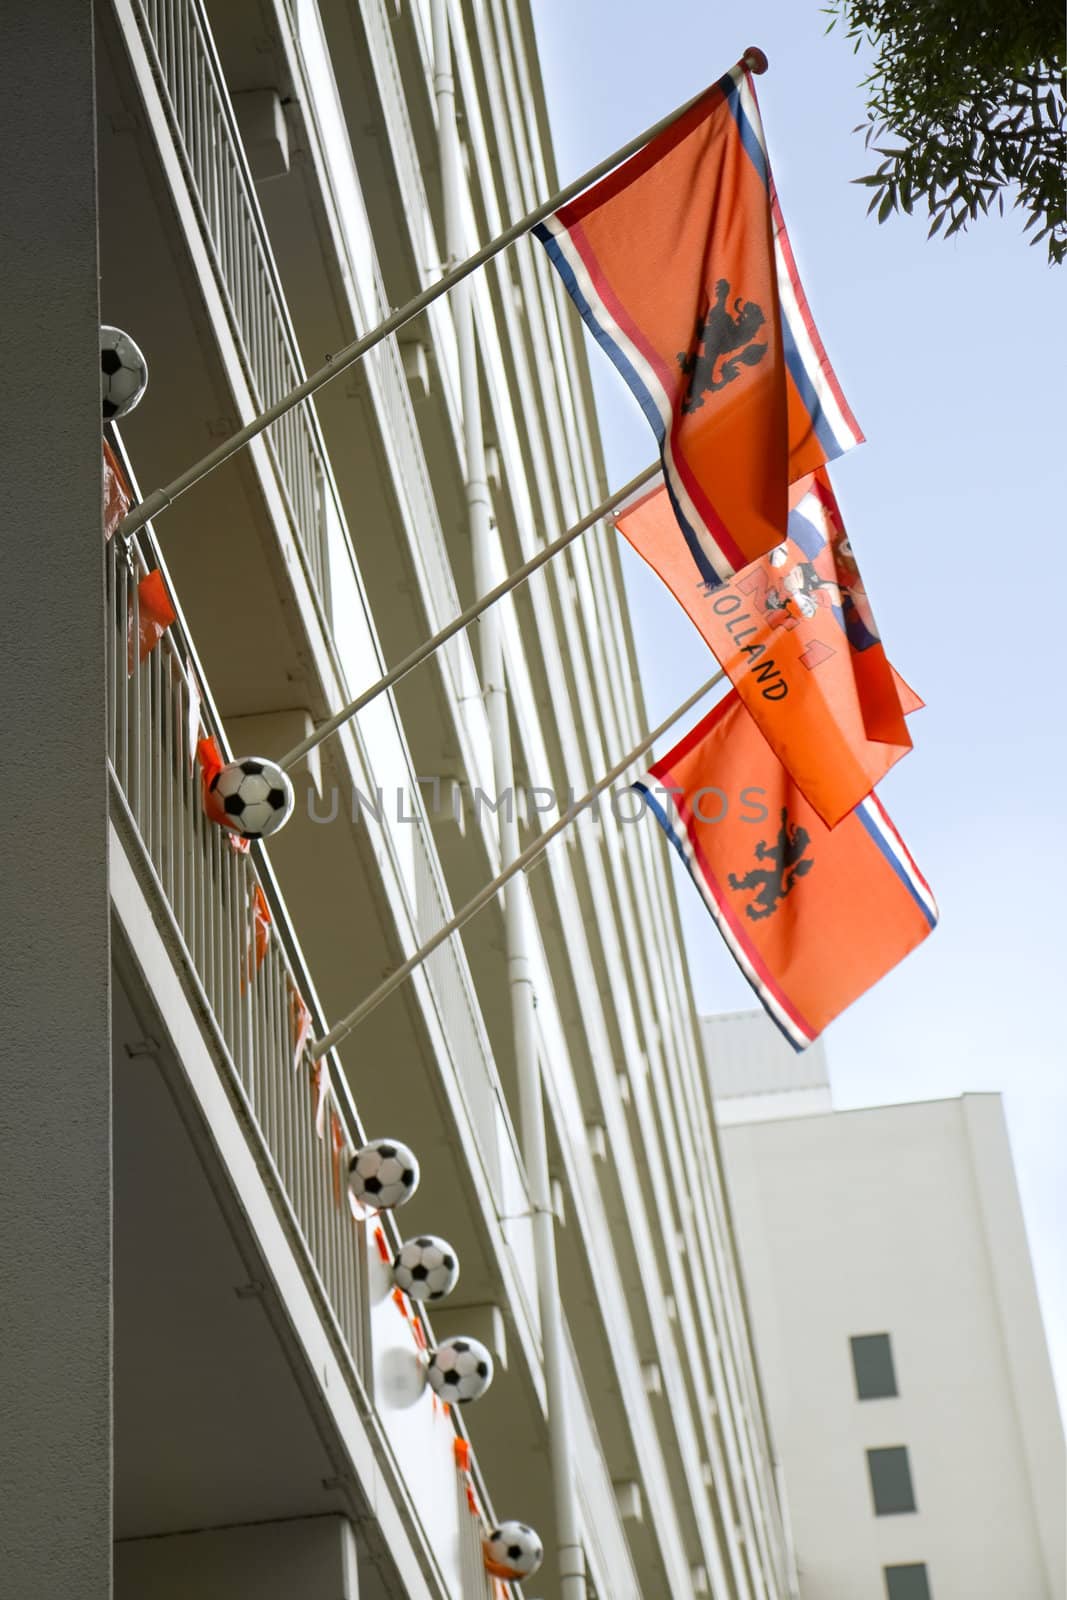 THE NETHERLANDS - 2012: Support of the Dutch team in the cities during soccer- or football championships, decorated appartmenthouse, June 2012, the Netherlands